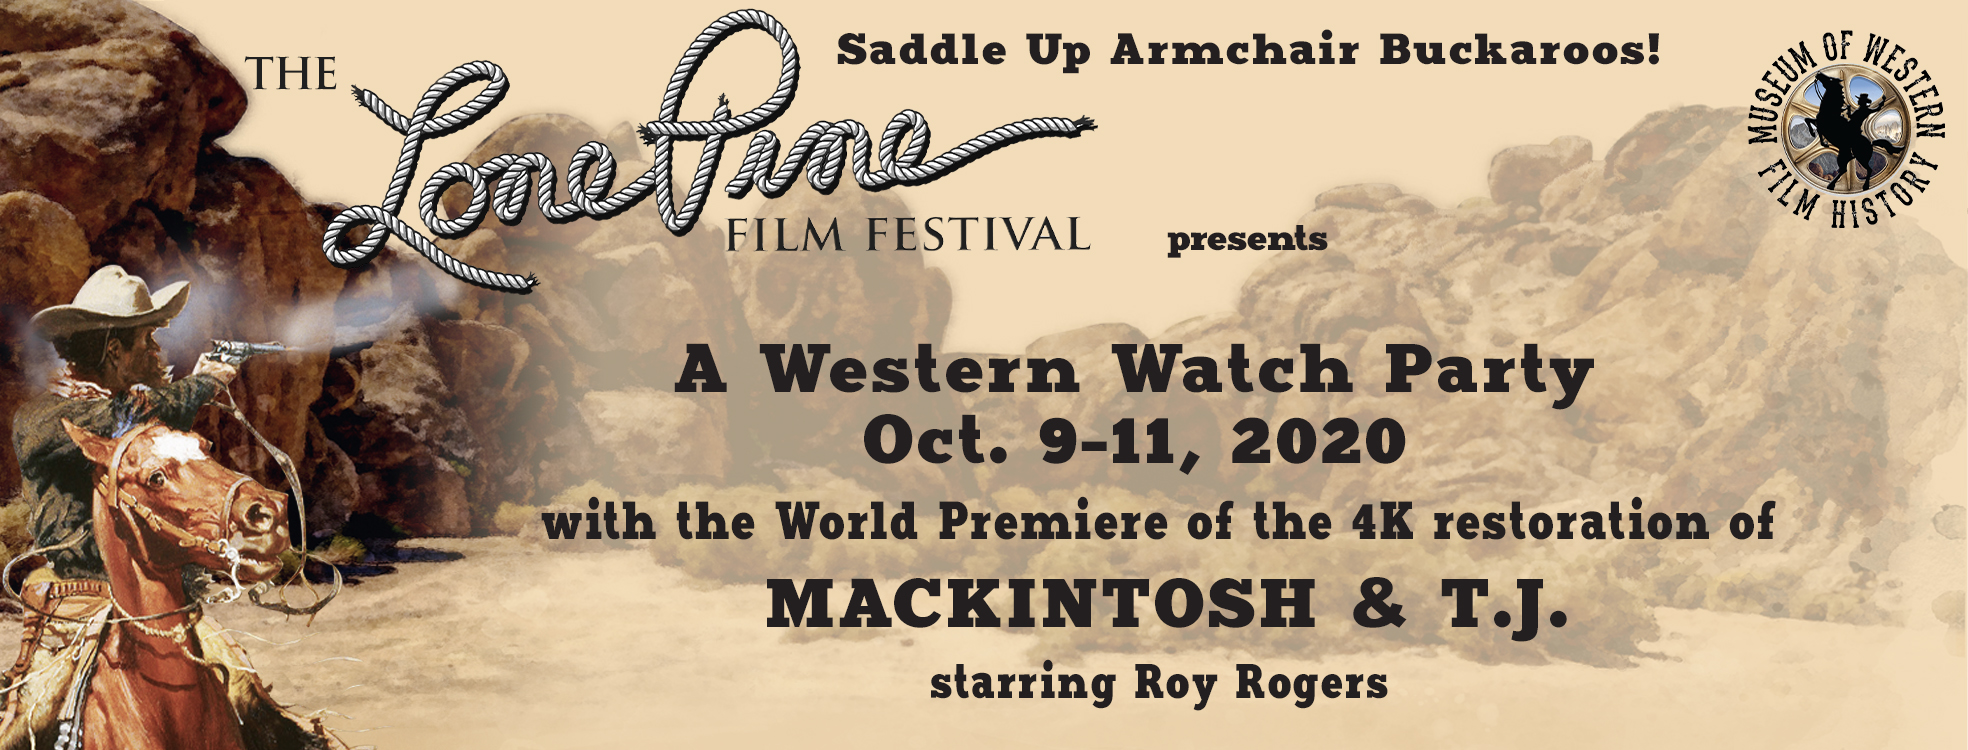 Calling All Armchair Buckaroos: The Lone Pine Film Festival Presents a Western Watch Party — Oct. 9-11, 2020